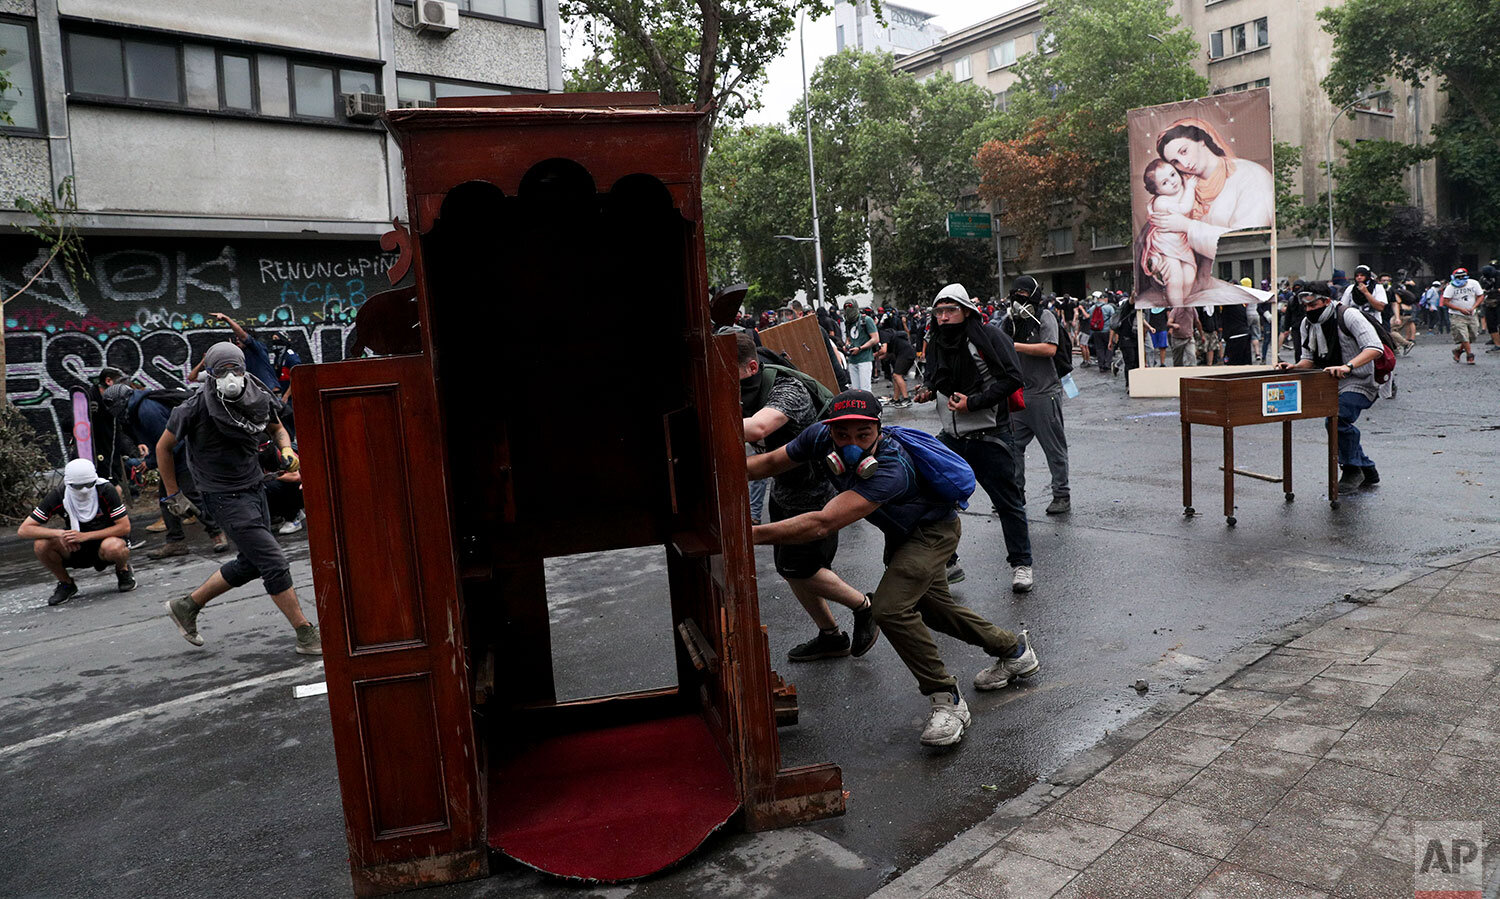  Anti-government protesters drag items from a church to be added to a barricade, in Santiago, Chile, Friday, Nov. 8, 2019.  Chile's president on Thursday announced measures to increase security and toughen sanctions for vandalism following three week